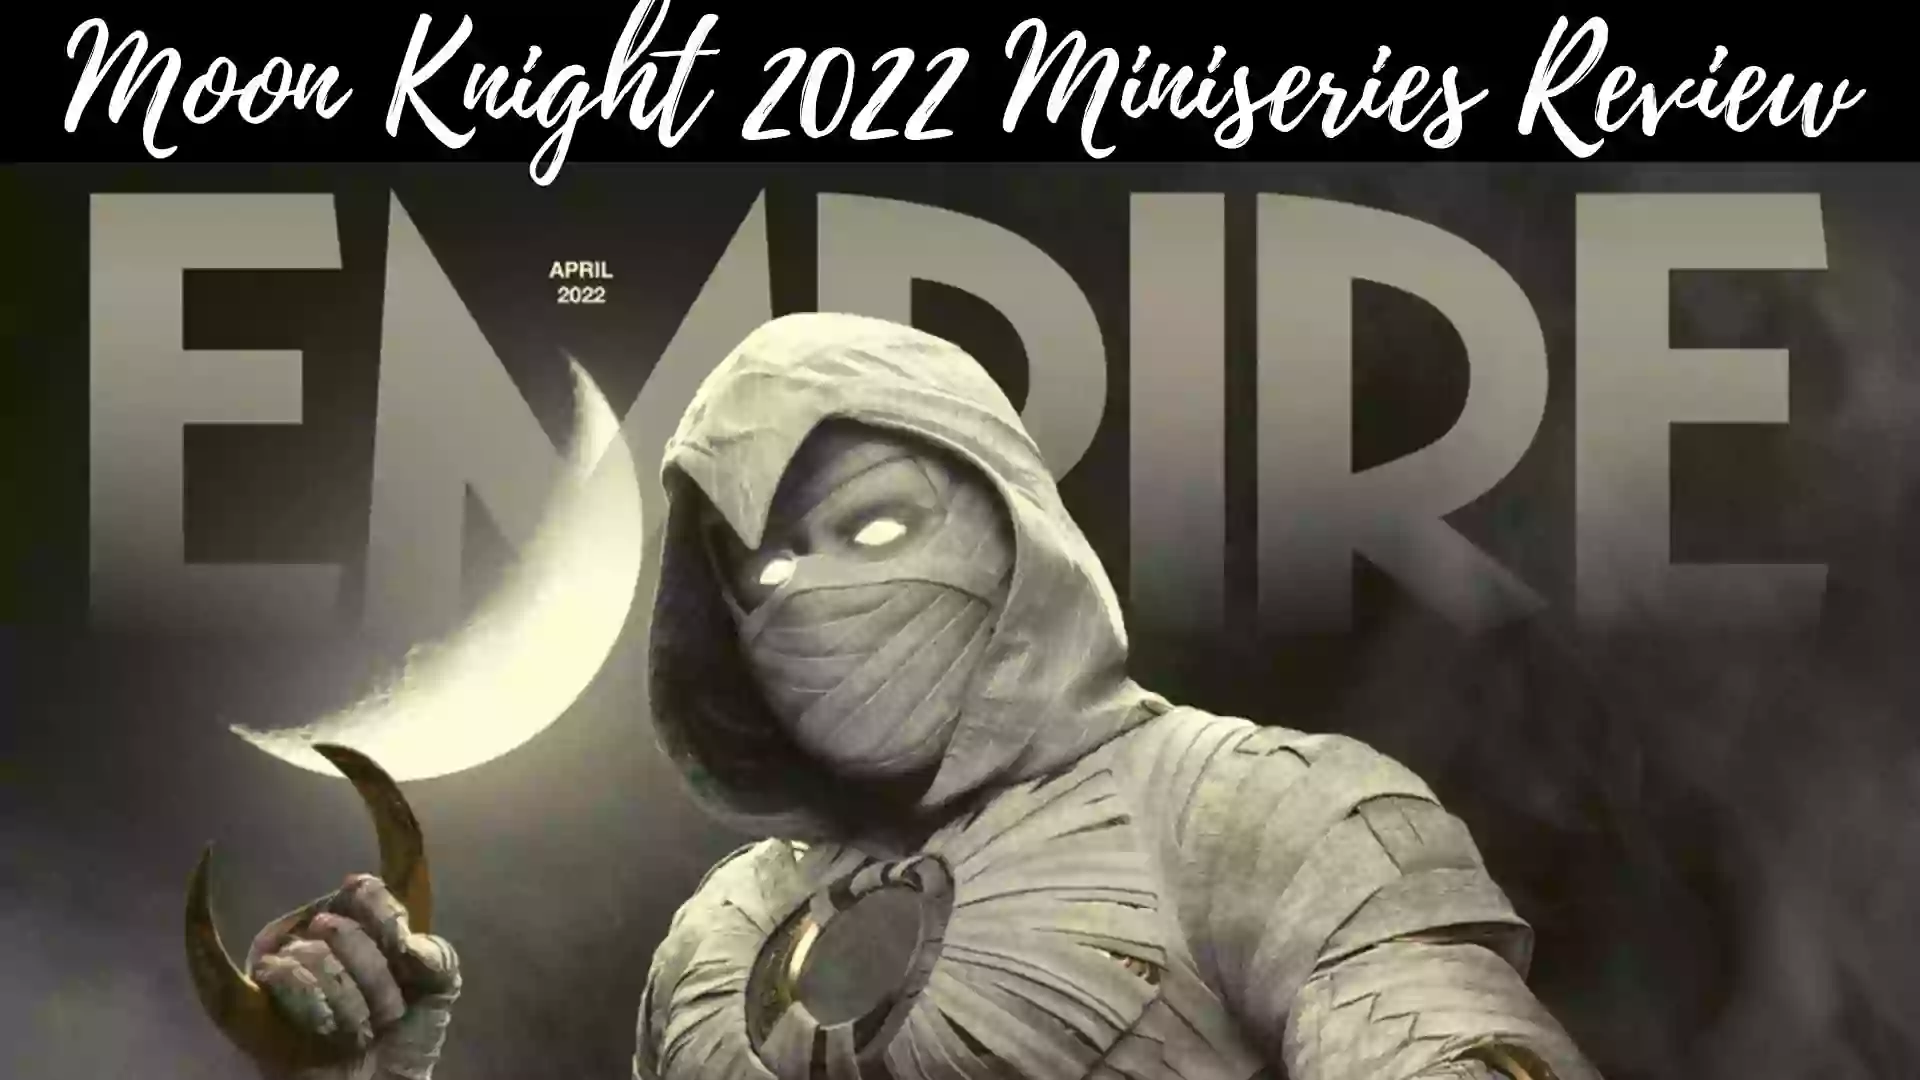 Moon Knight Review | Moon Knight 2022 Miniseries Review